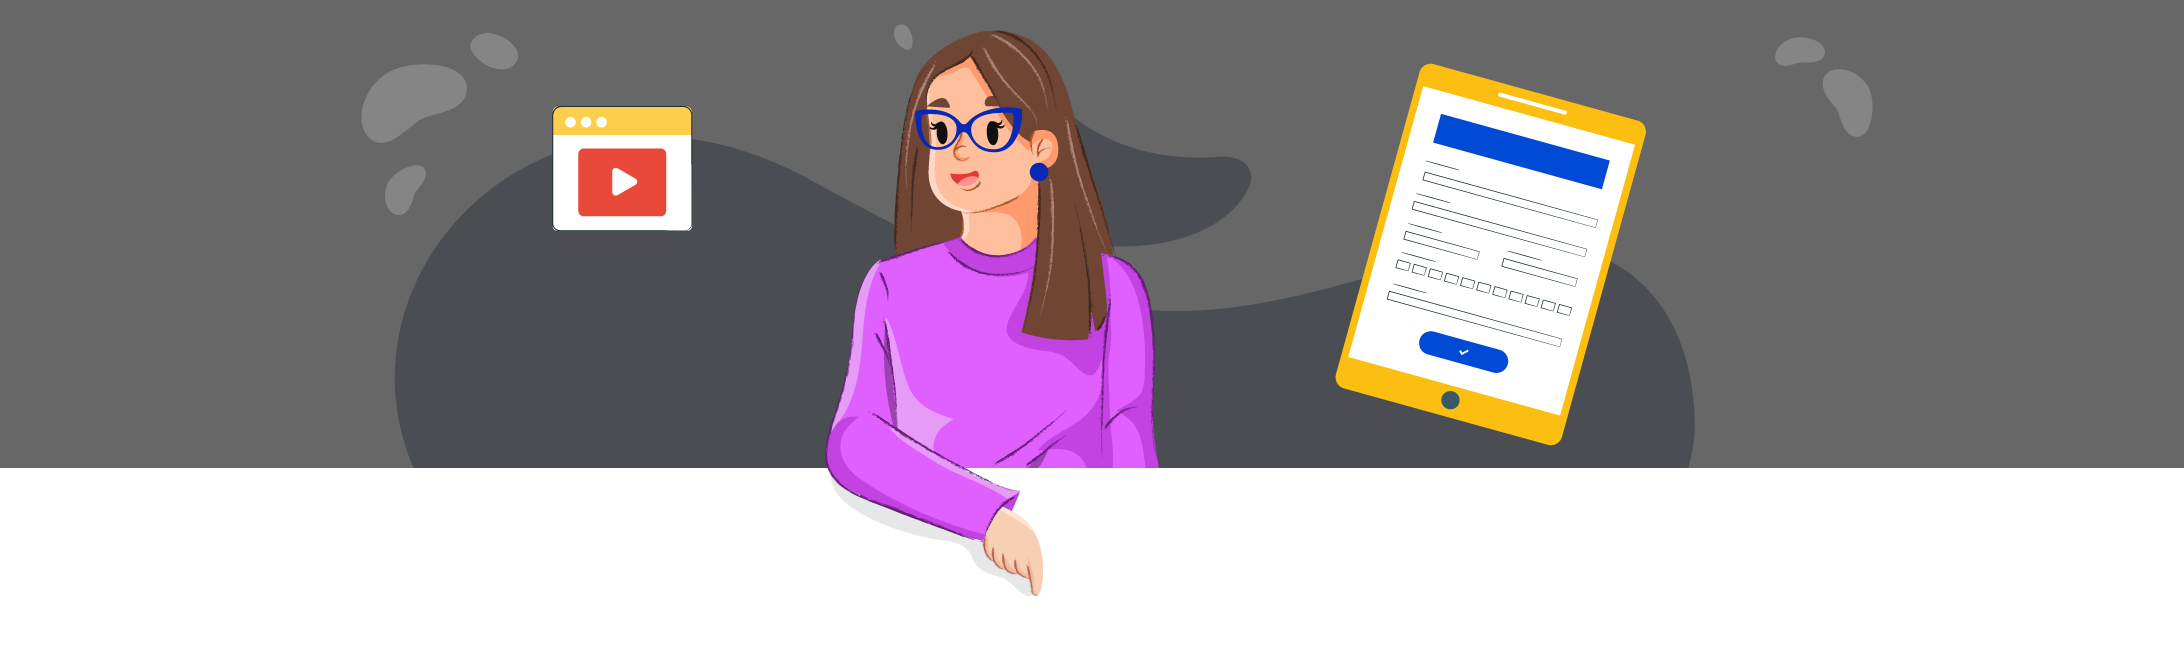 A woman wearing purple glasses points her finger at a contact form below her. In the background, an illustration alluding to video editing can be seen.